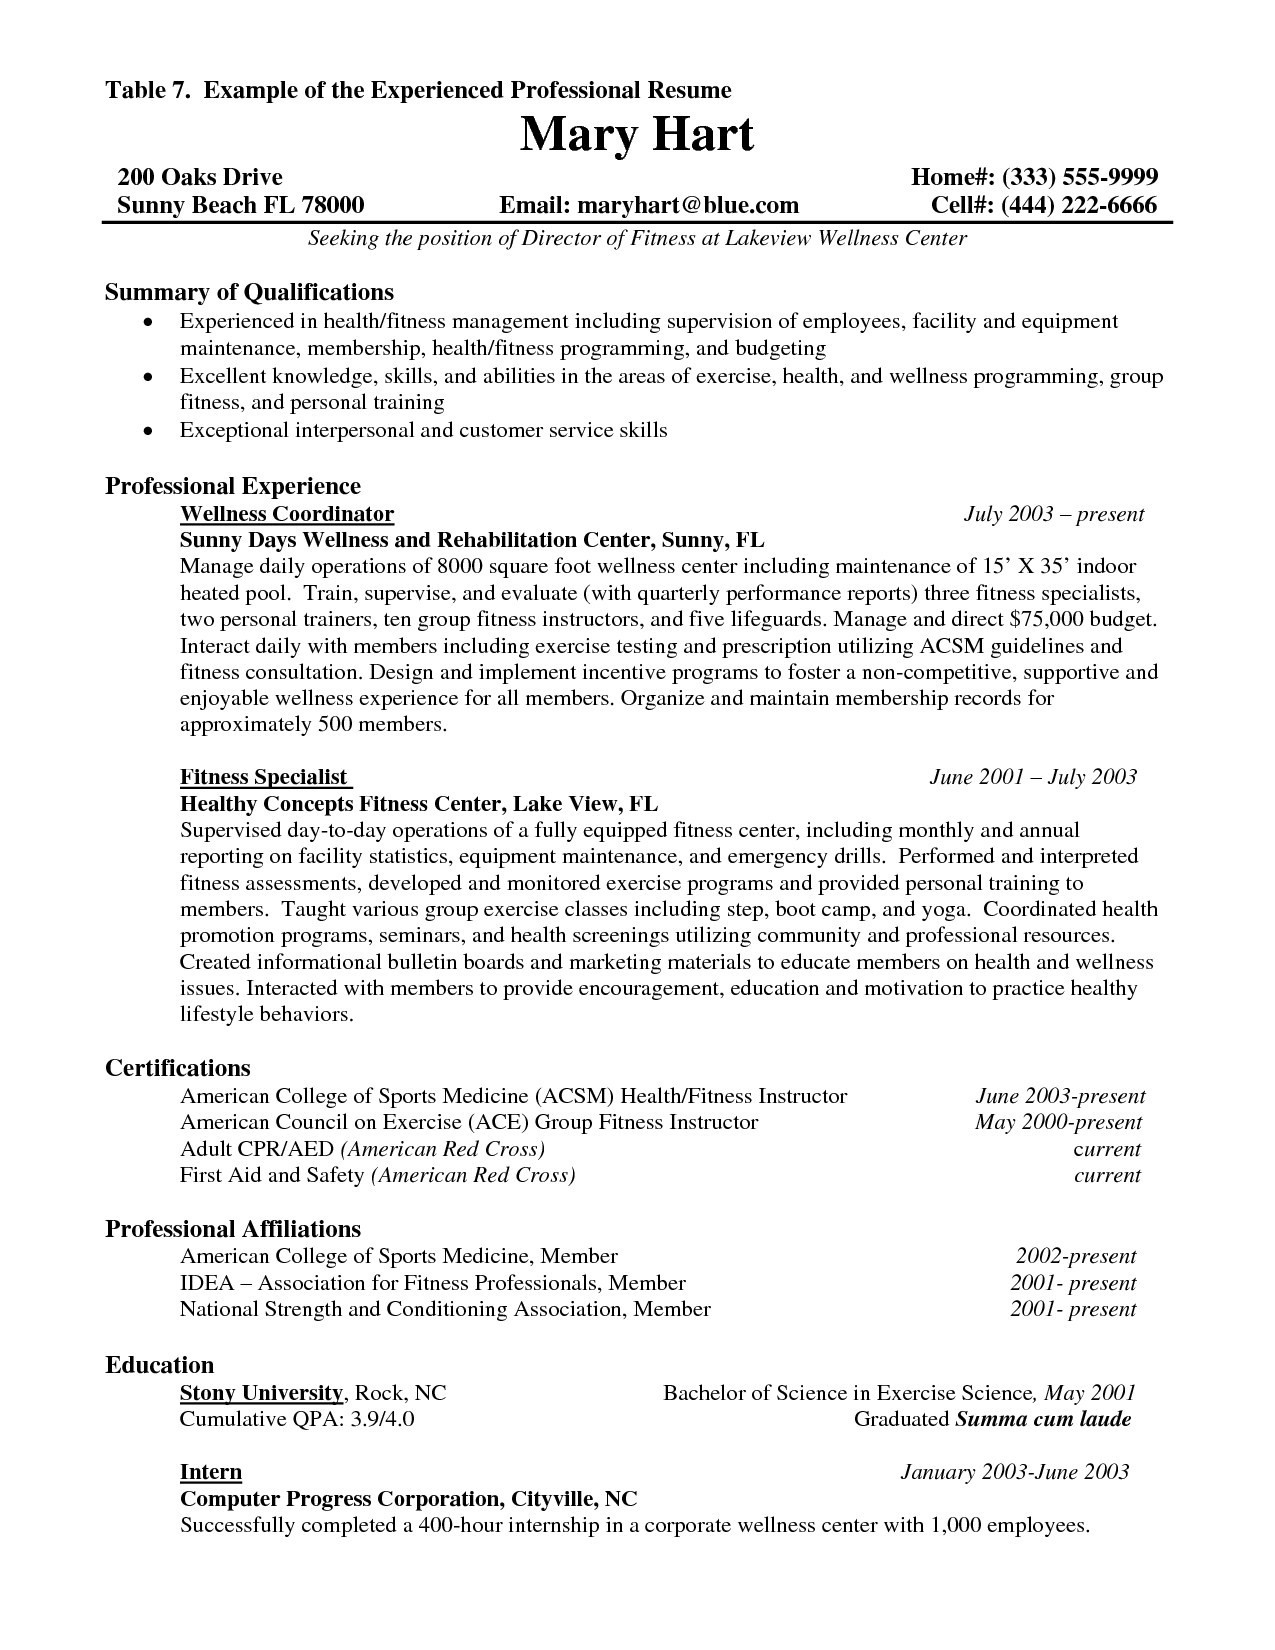 Cover Letter Template for Teenager - Resume Template for College Graduate Ideas Accounting Internship